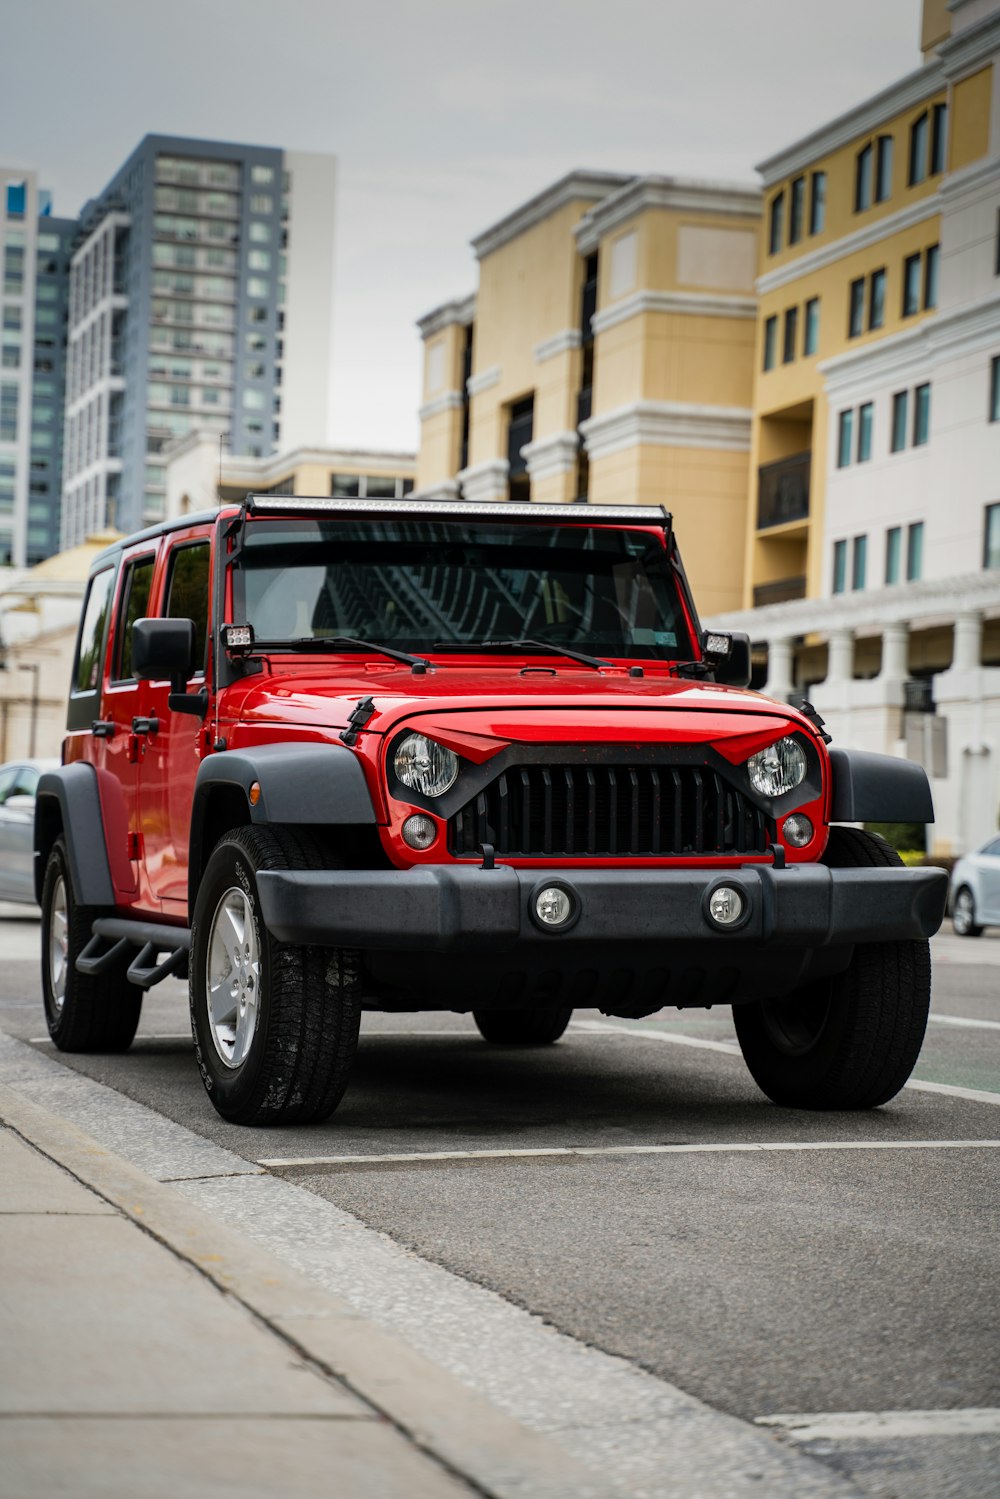 A red jeep parked in front of a louis vuitton store photo – Free Hamburg  Image on Unsplash